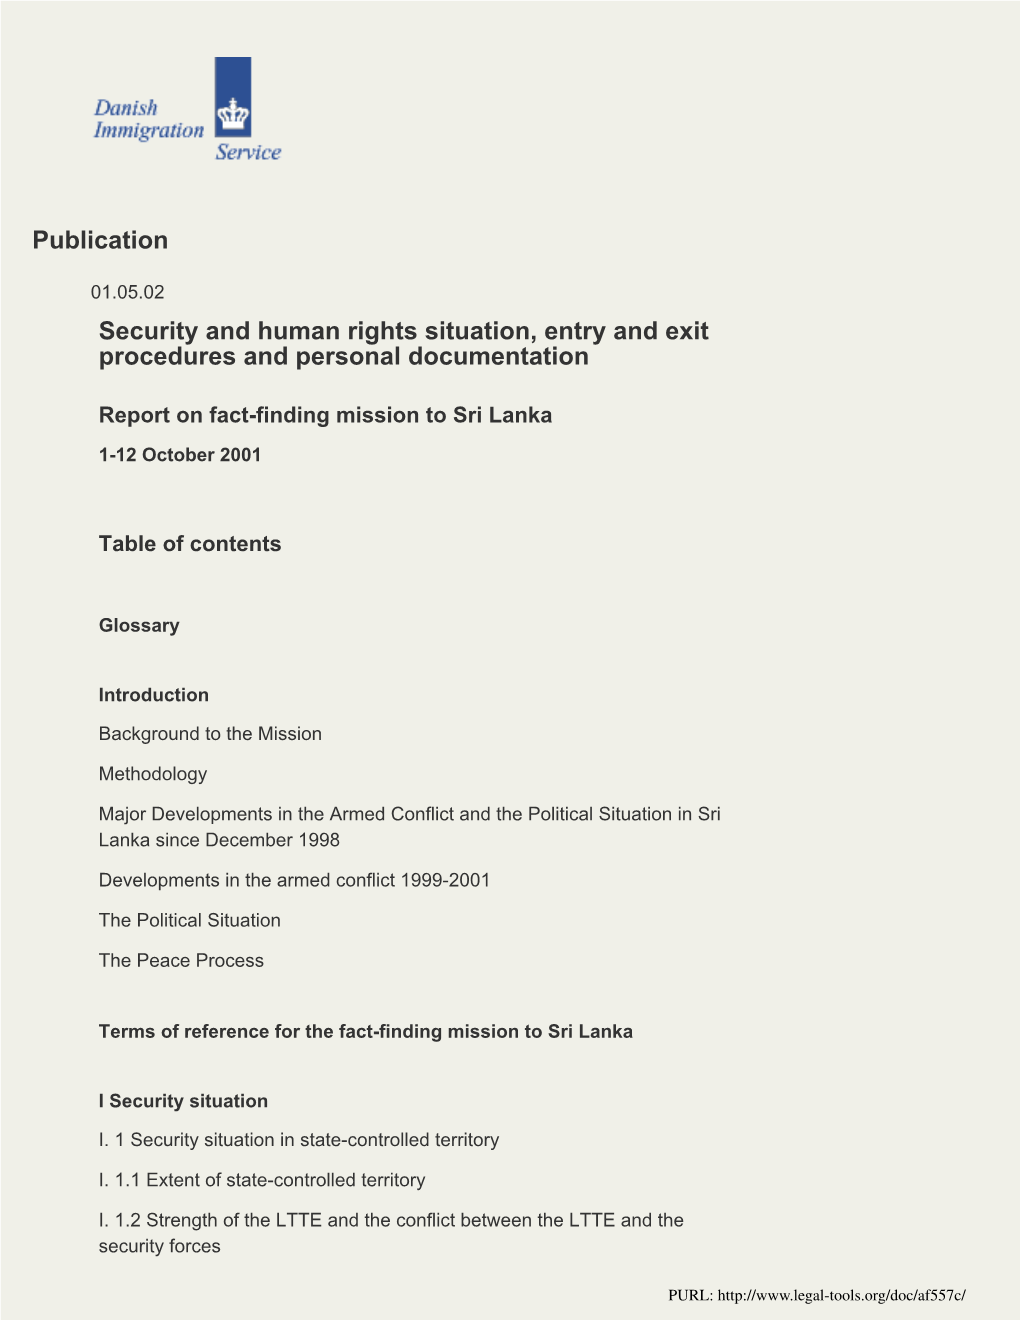 Publication Security and Human Rights Situation, Entry and Exit Procedures